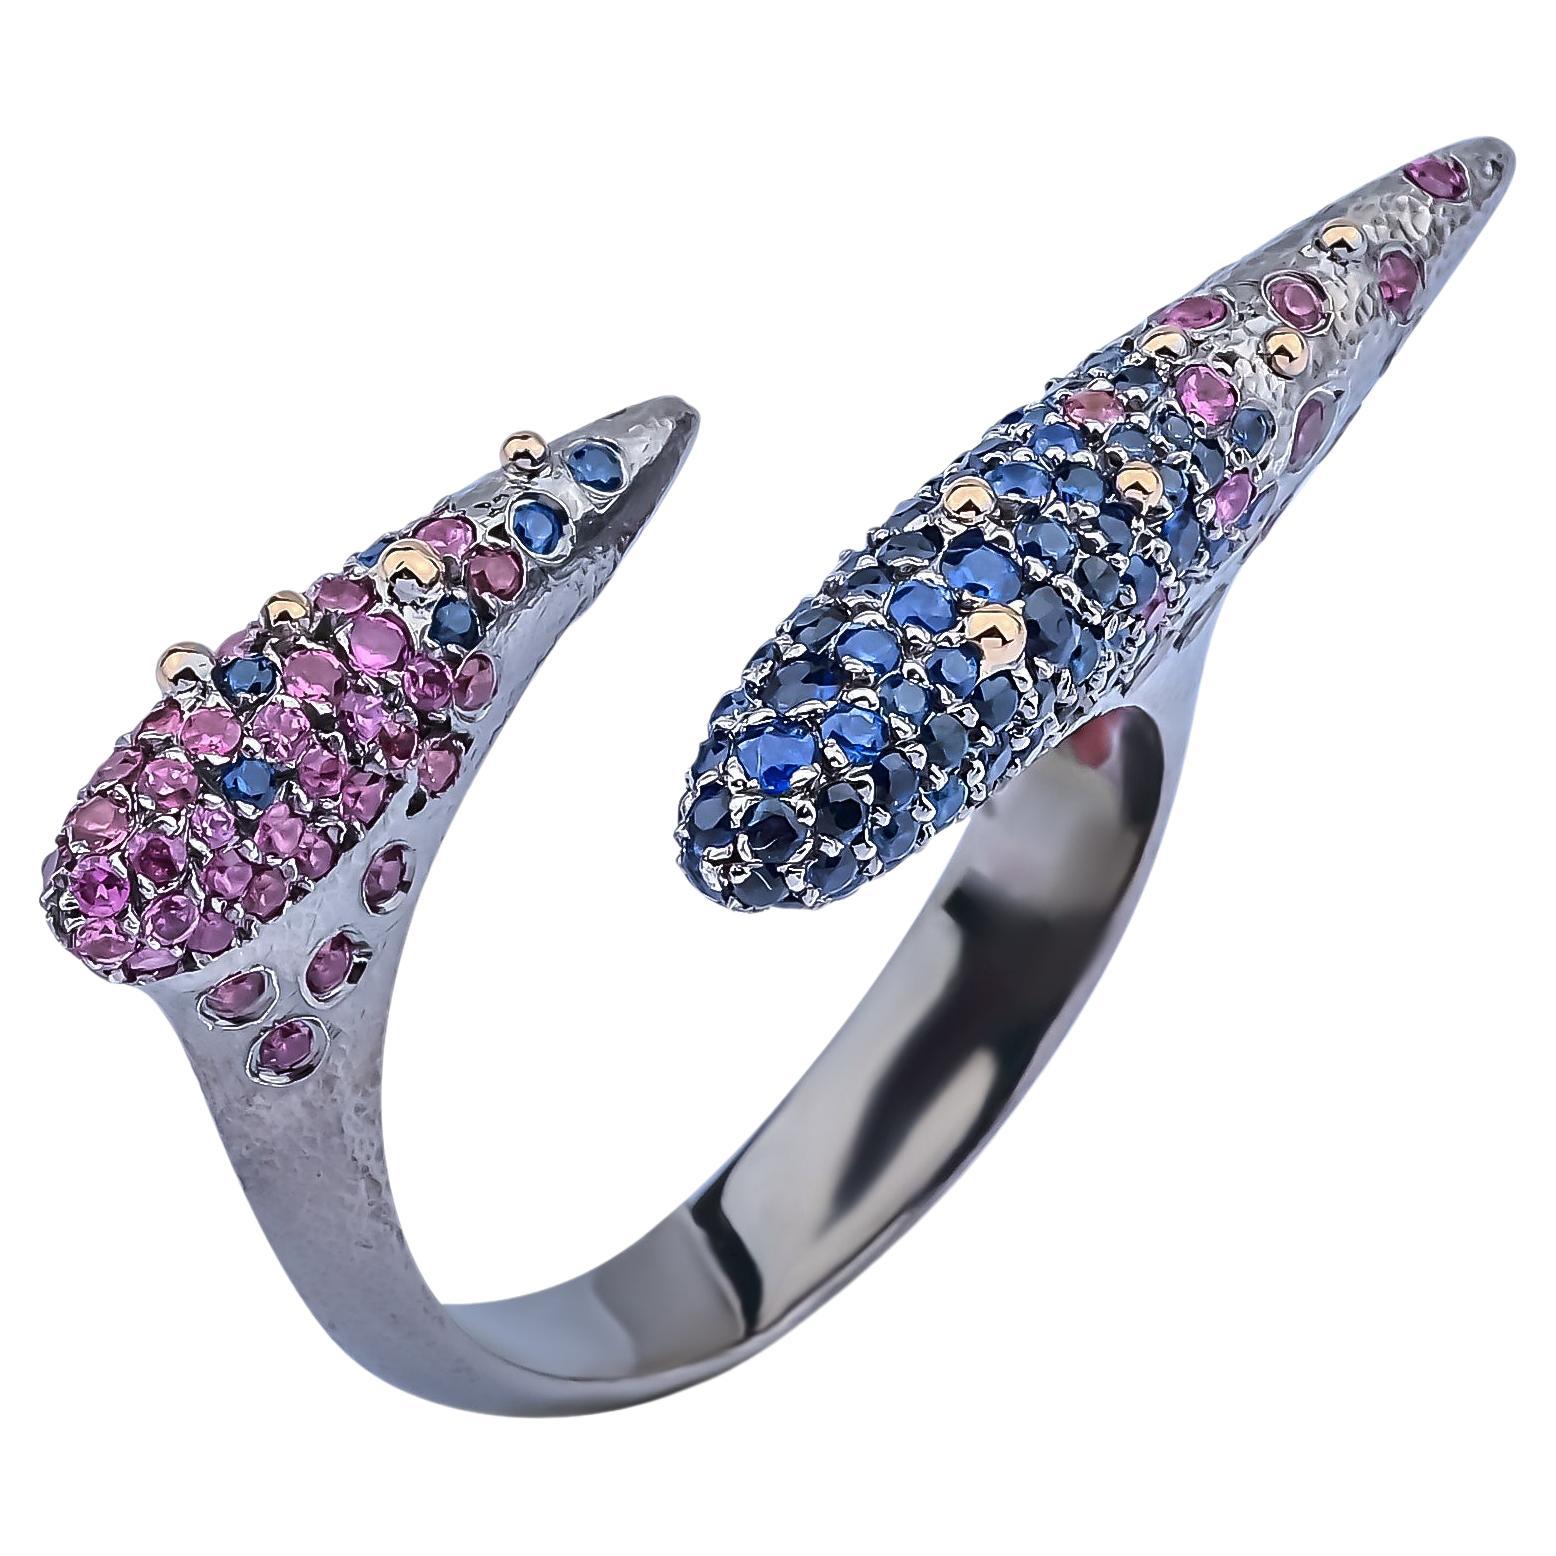 Arman  Suciyan  Blue Sapphire and  Rhodolite Silver and  Enamel Ring   For Sale